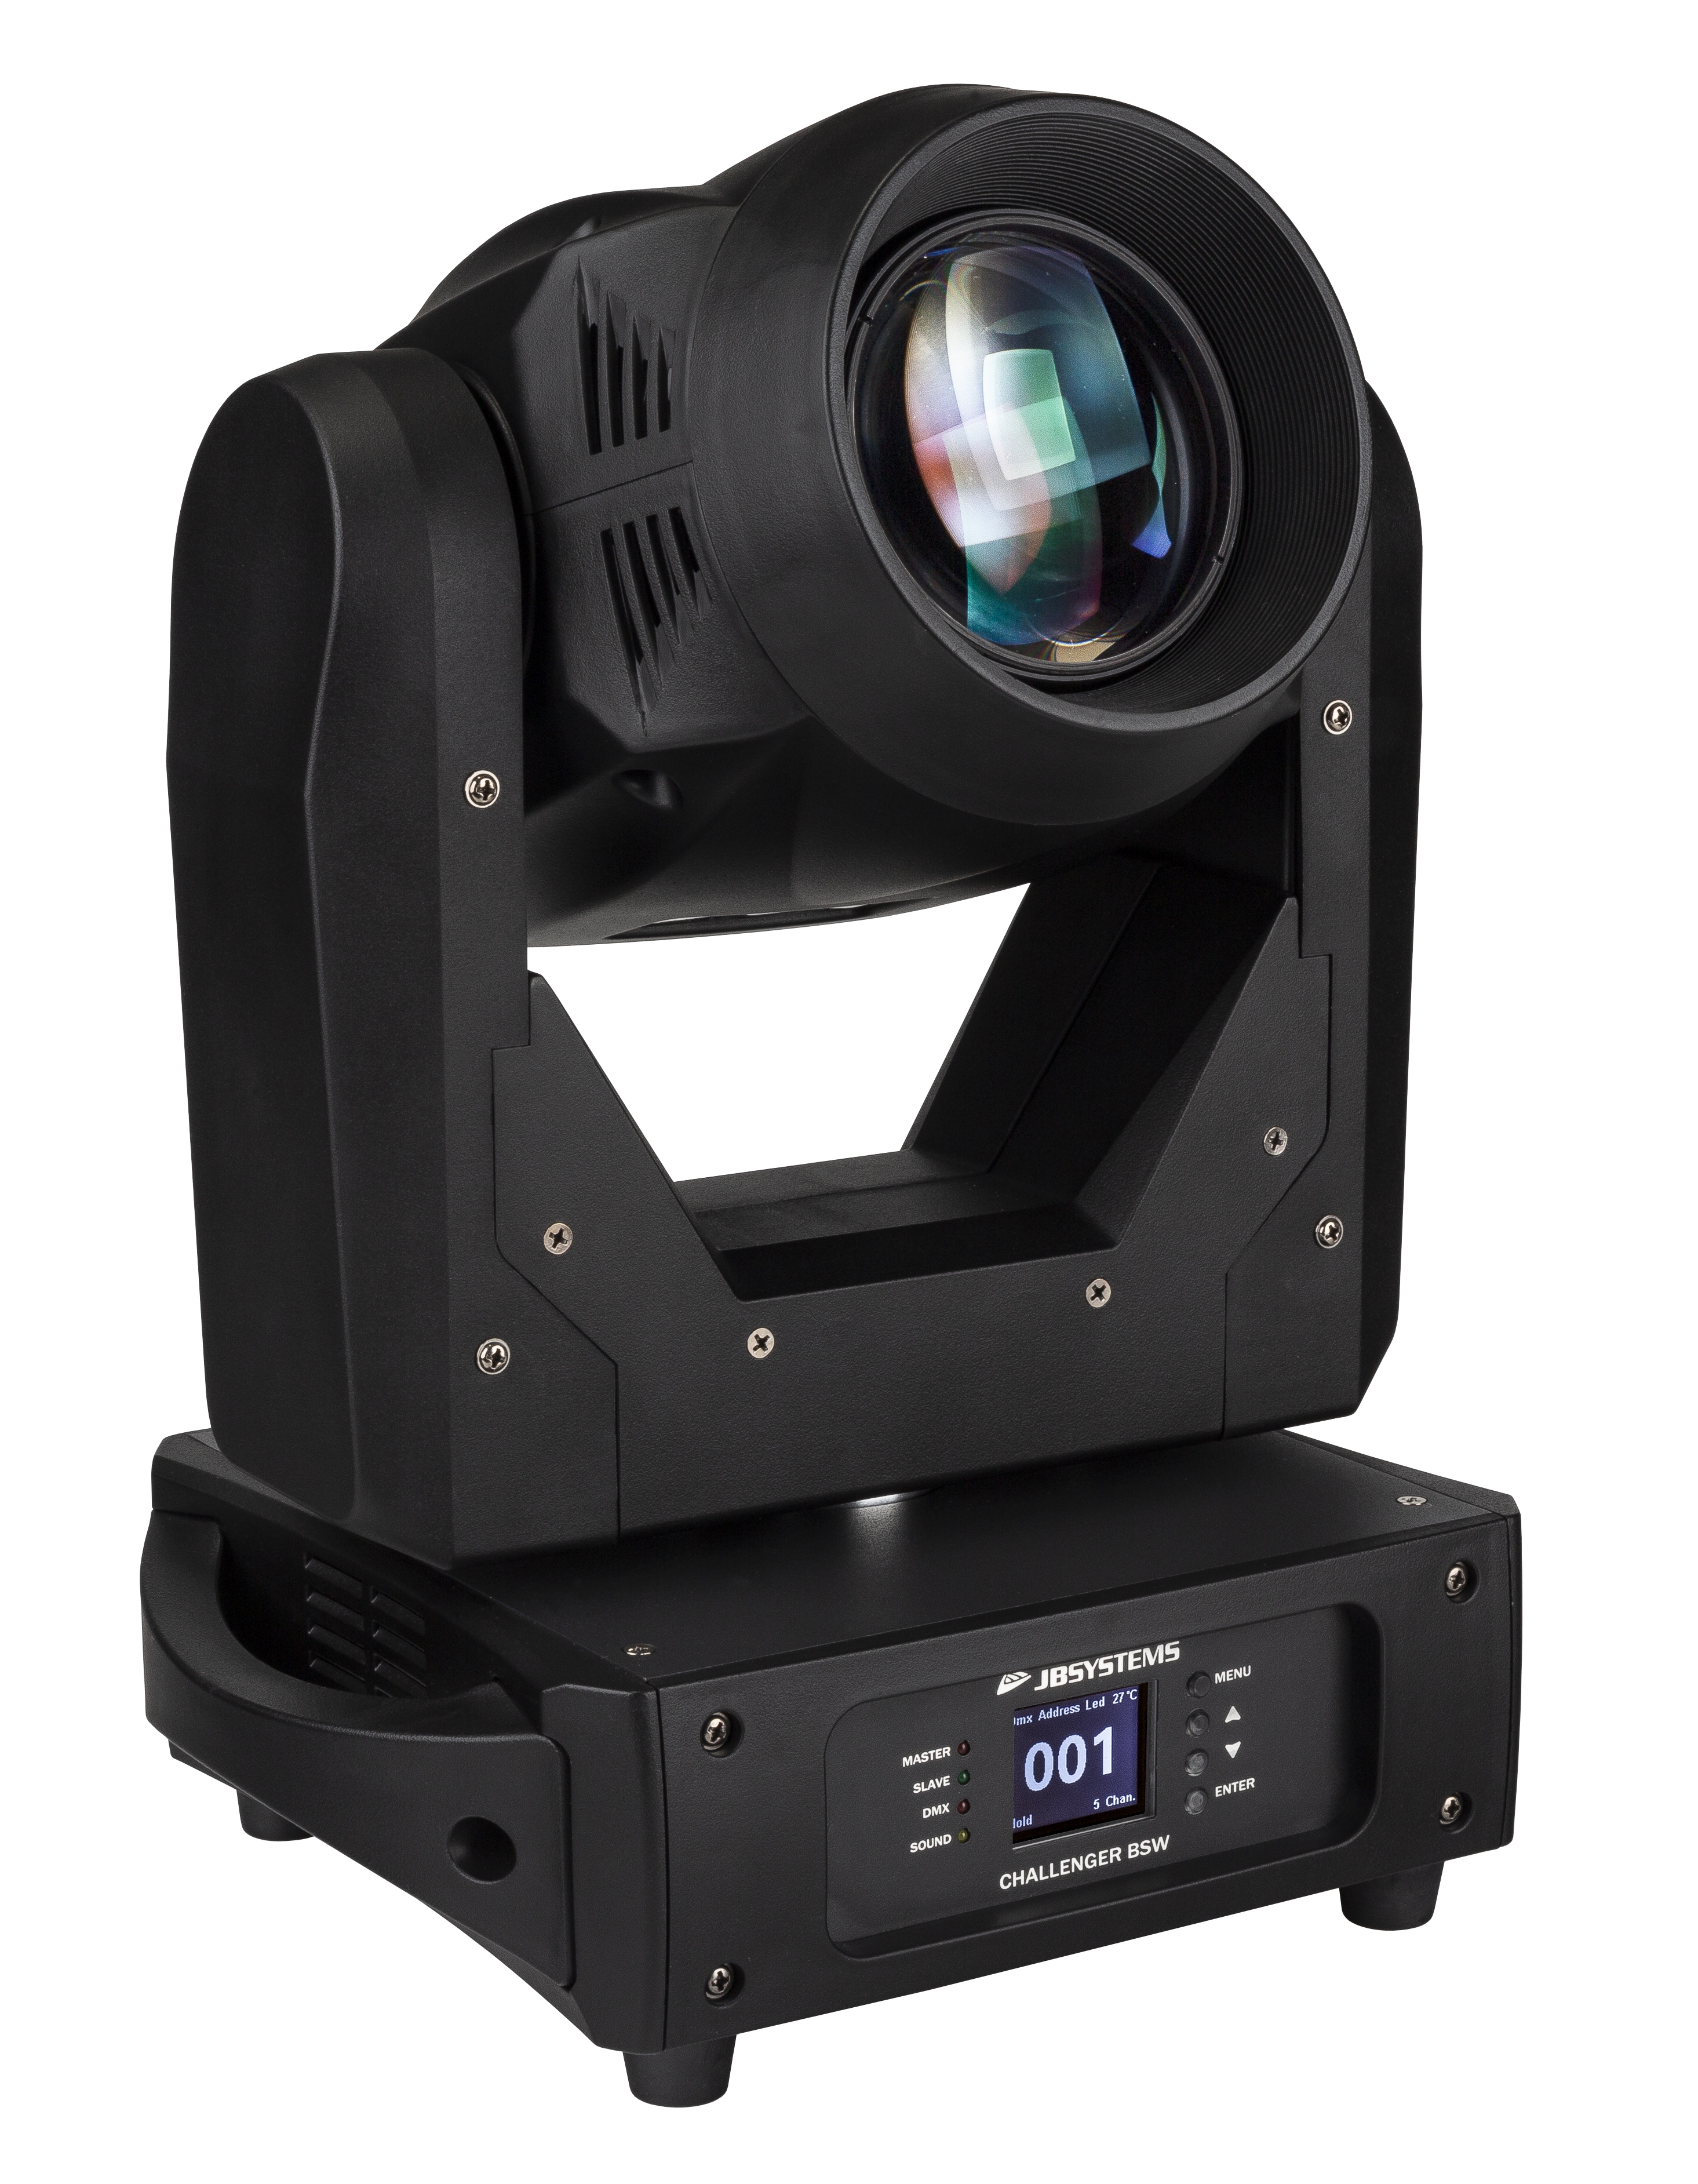 Superb 150W Beam/Spot/Wash Moving head with motorized focus and zoom and 3 facet rotating prism!